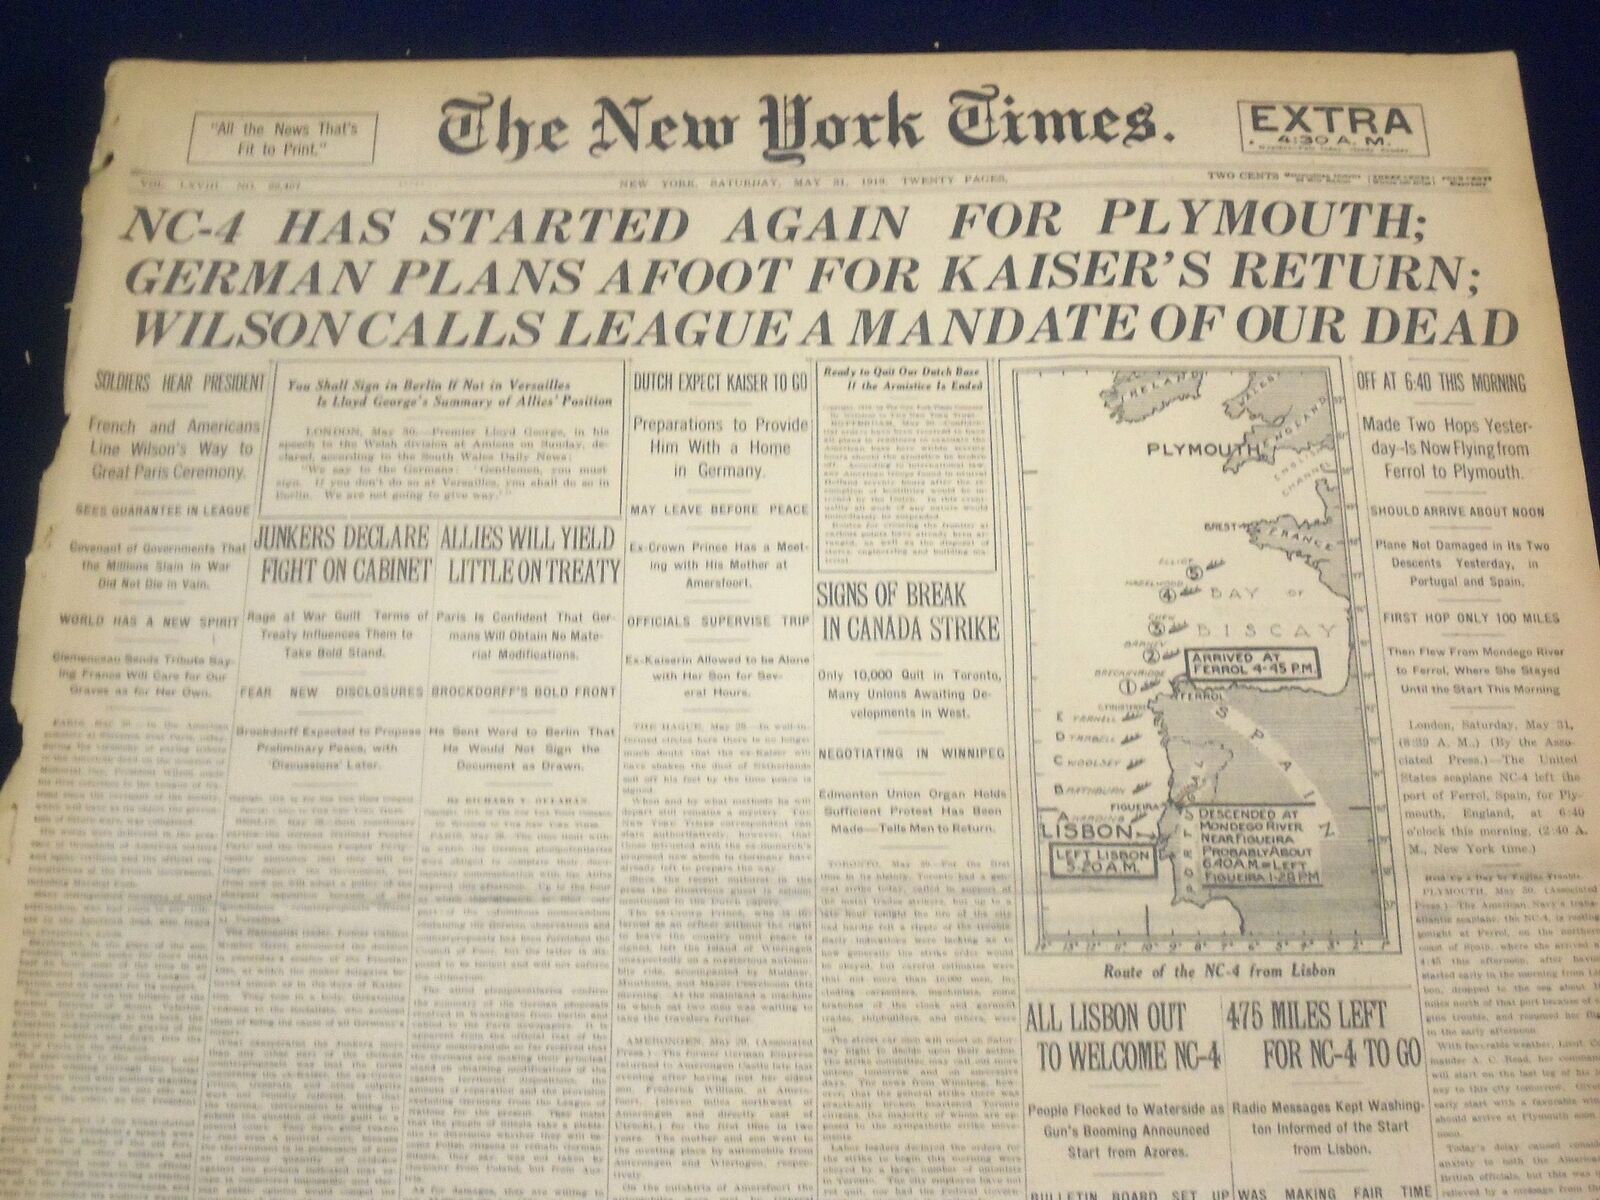 1919 MAY 31 NEW YORK TIMES - NC-4 STARTED AGAIN FOR PLYMOUTH - NT 9253